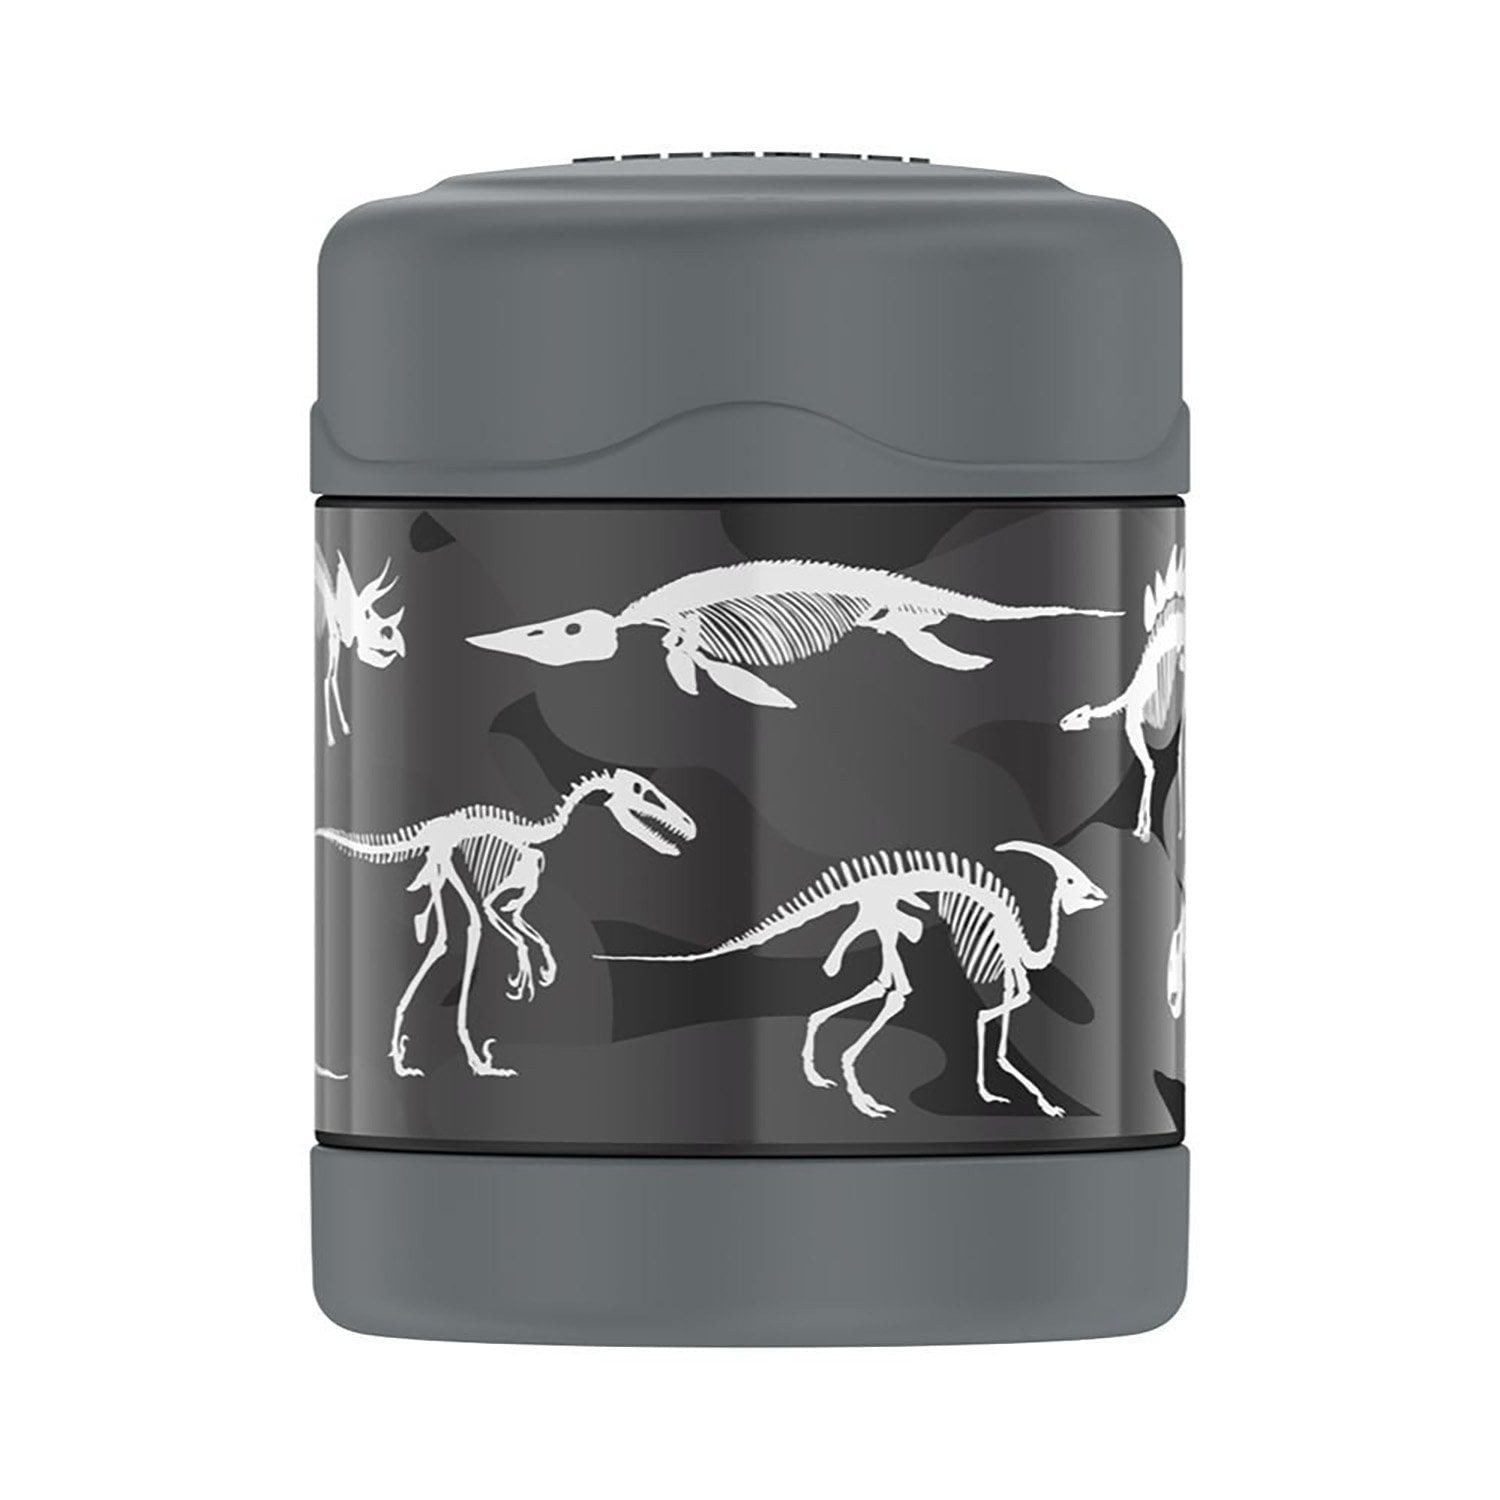 https://cdn.shopify.com/s/files/1/1416/1268/products/thermos-funtainer-stainless-steel-vacuum-insulated-food-jar-290ml-dinosaur-23217653645506.jpg?v=1648129550&width=1500